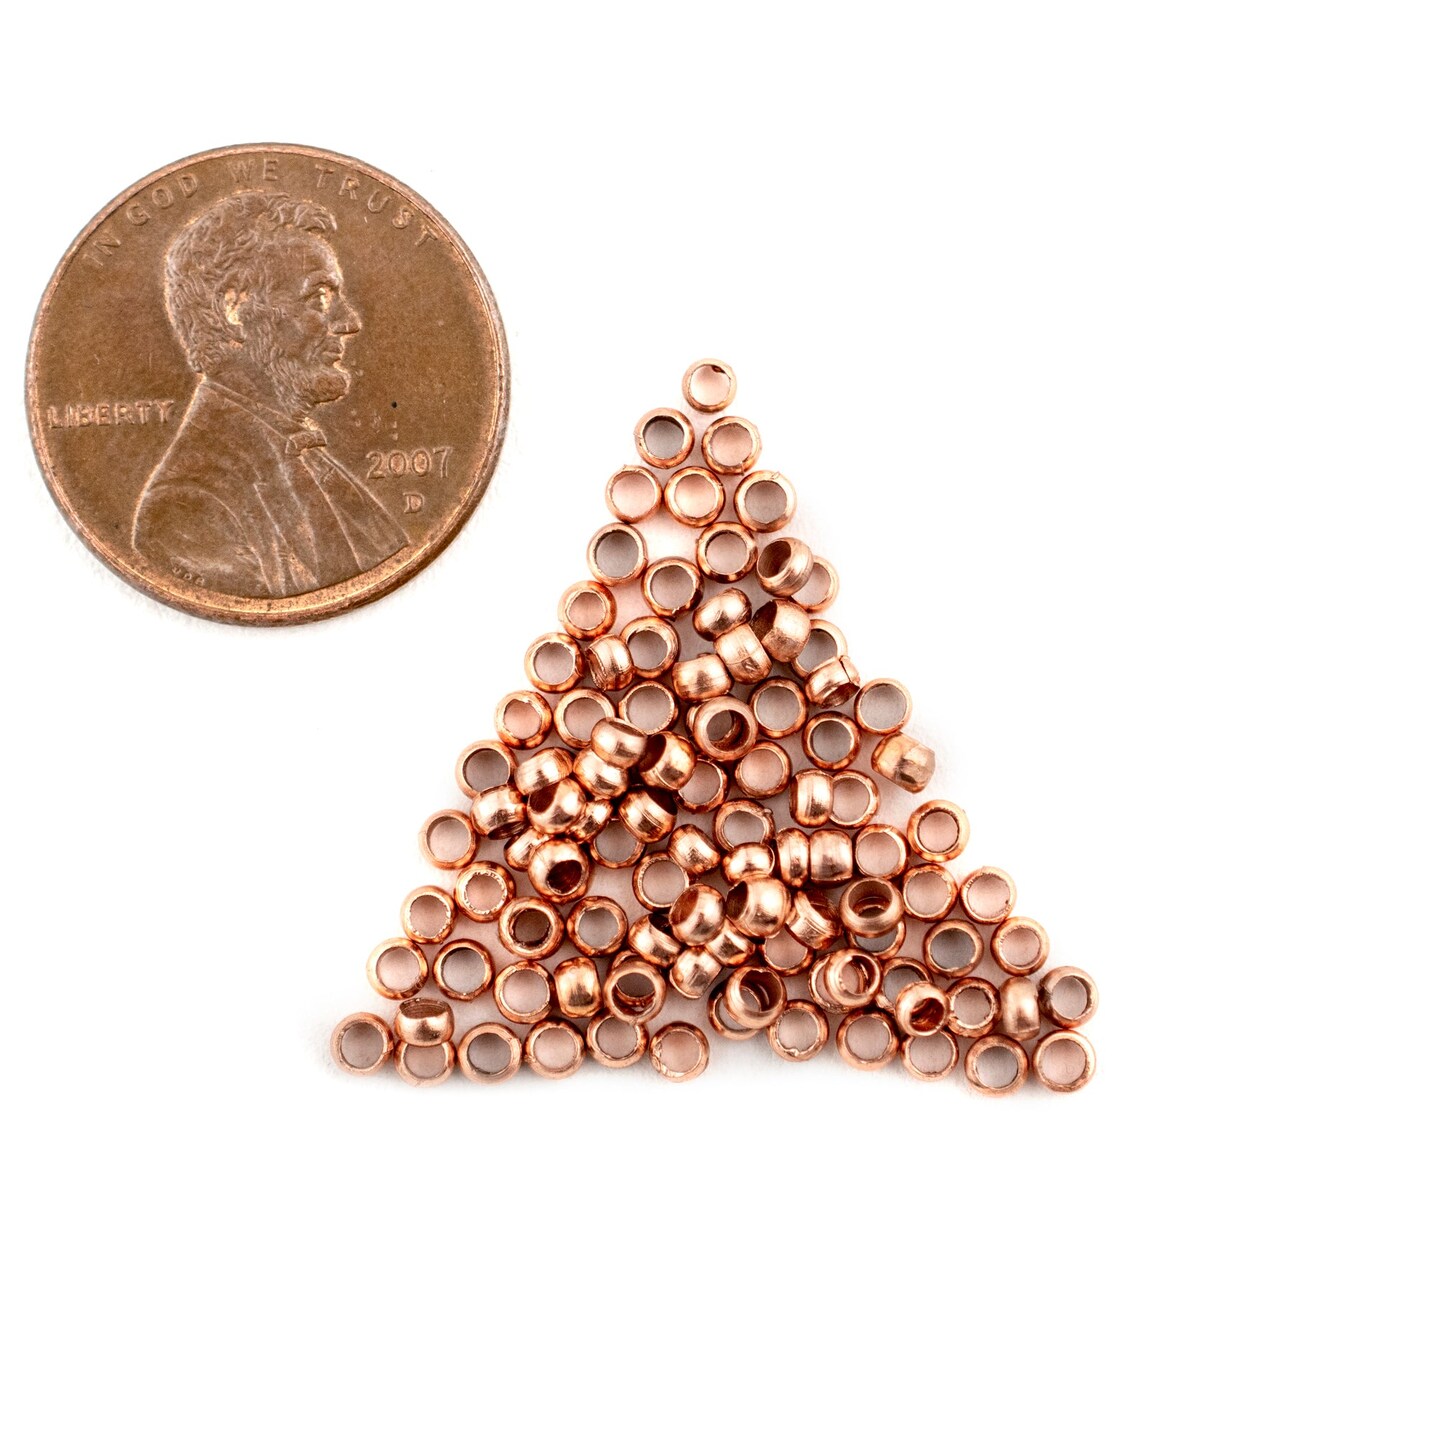 TheBeadChest Copper Round Crimp Beads (2.5mm, Set of 100)